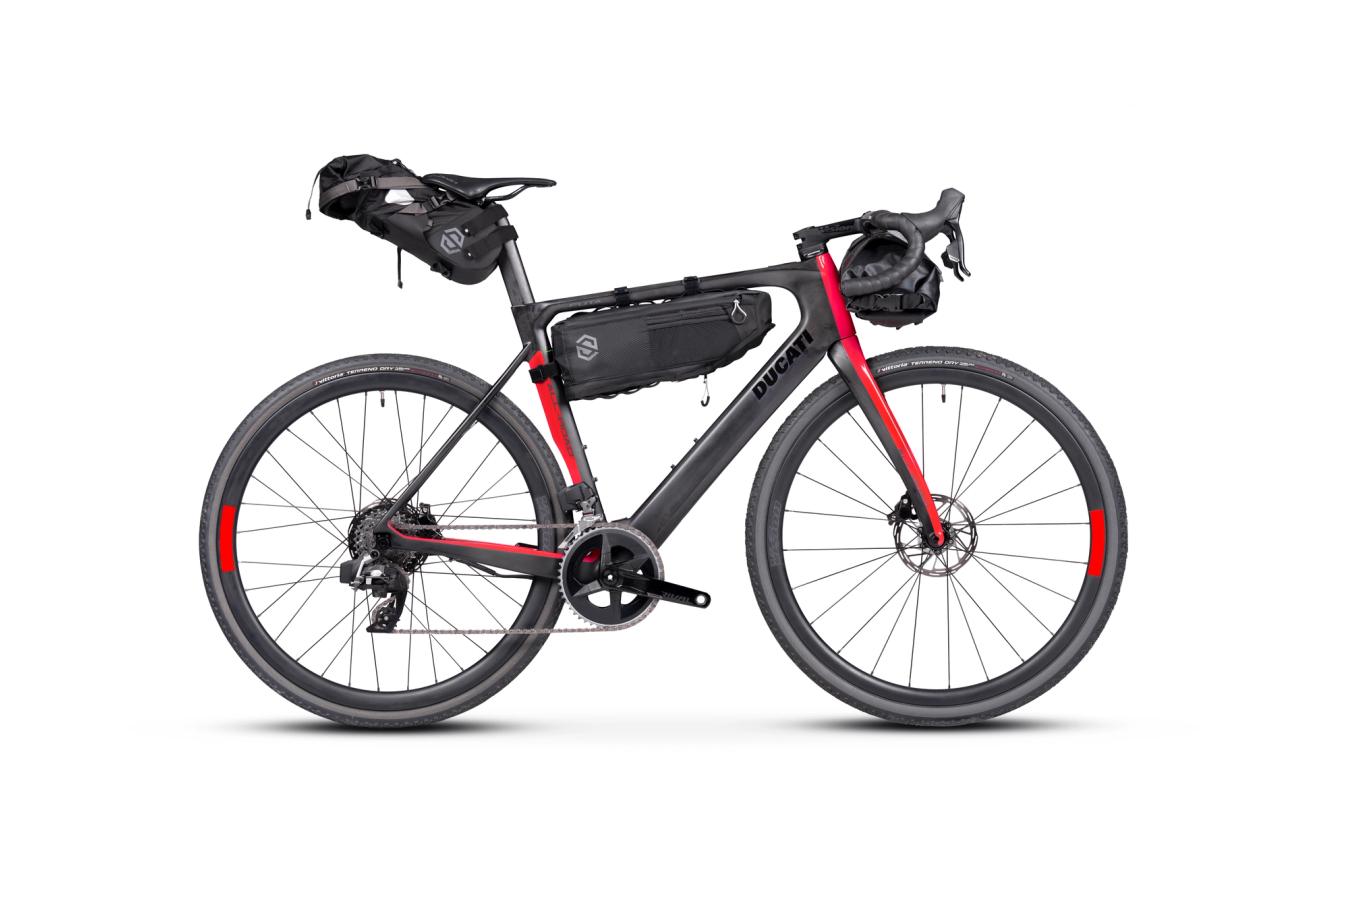 The complete bike weighs in at 12.4kg, making it fairly light by e-bike standards